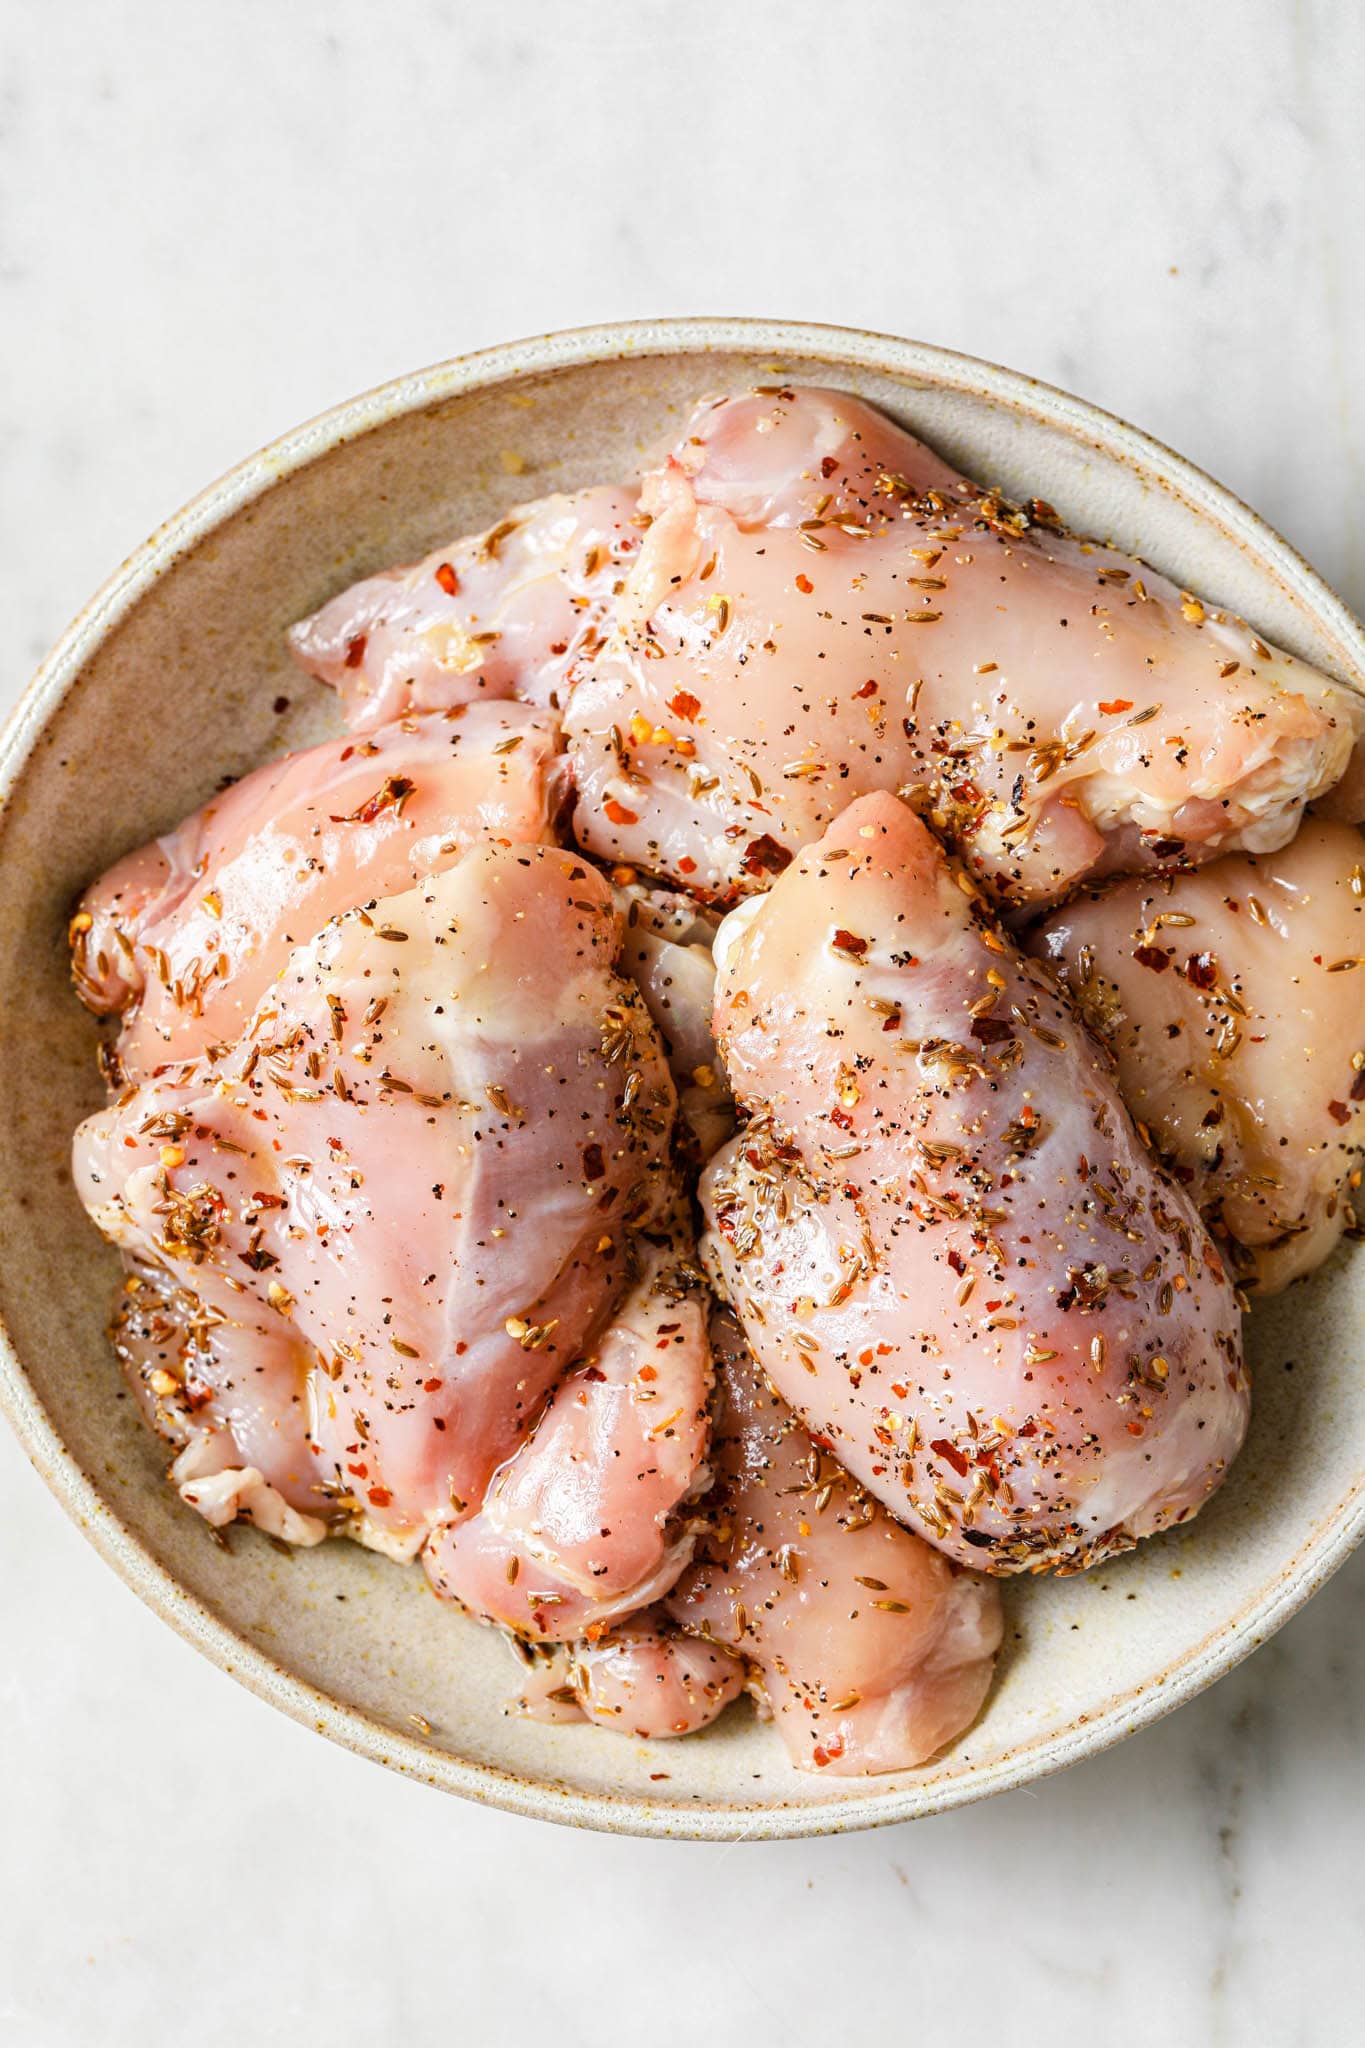 Uncooked bone-in skinless chicken thighs in a bowl.